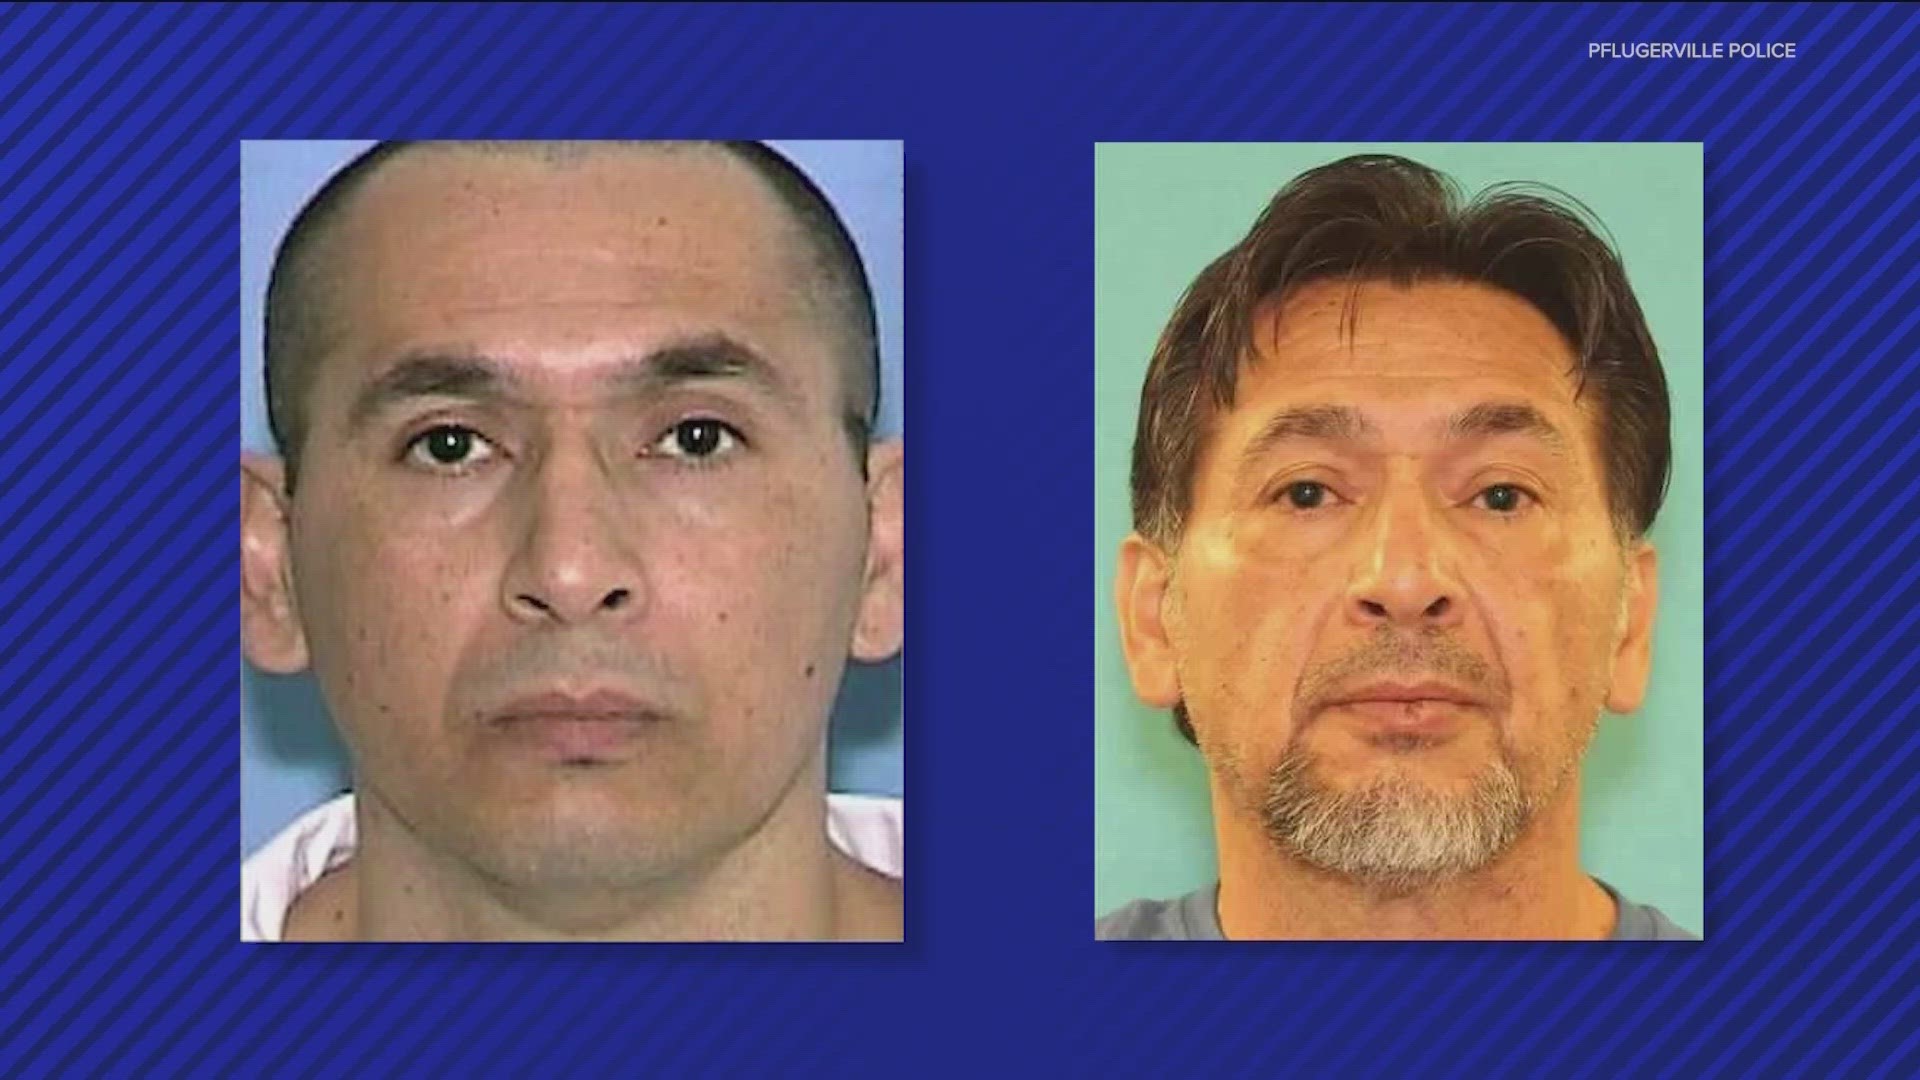 The suspect, Raul Meza Jr., was convicted for a 1982 murder in Travis County.